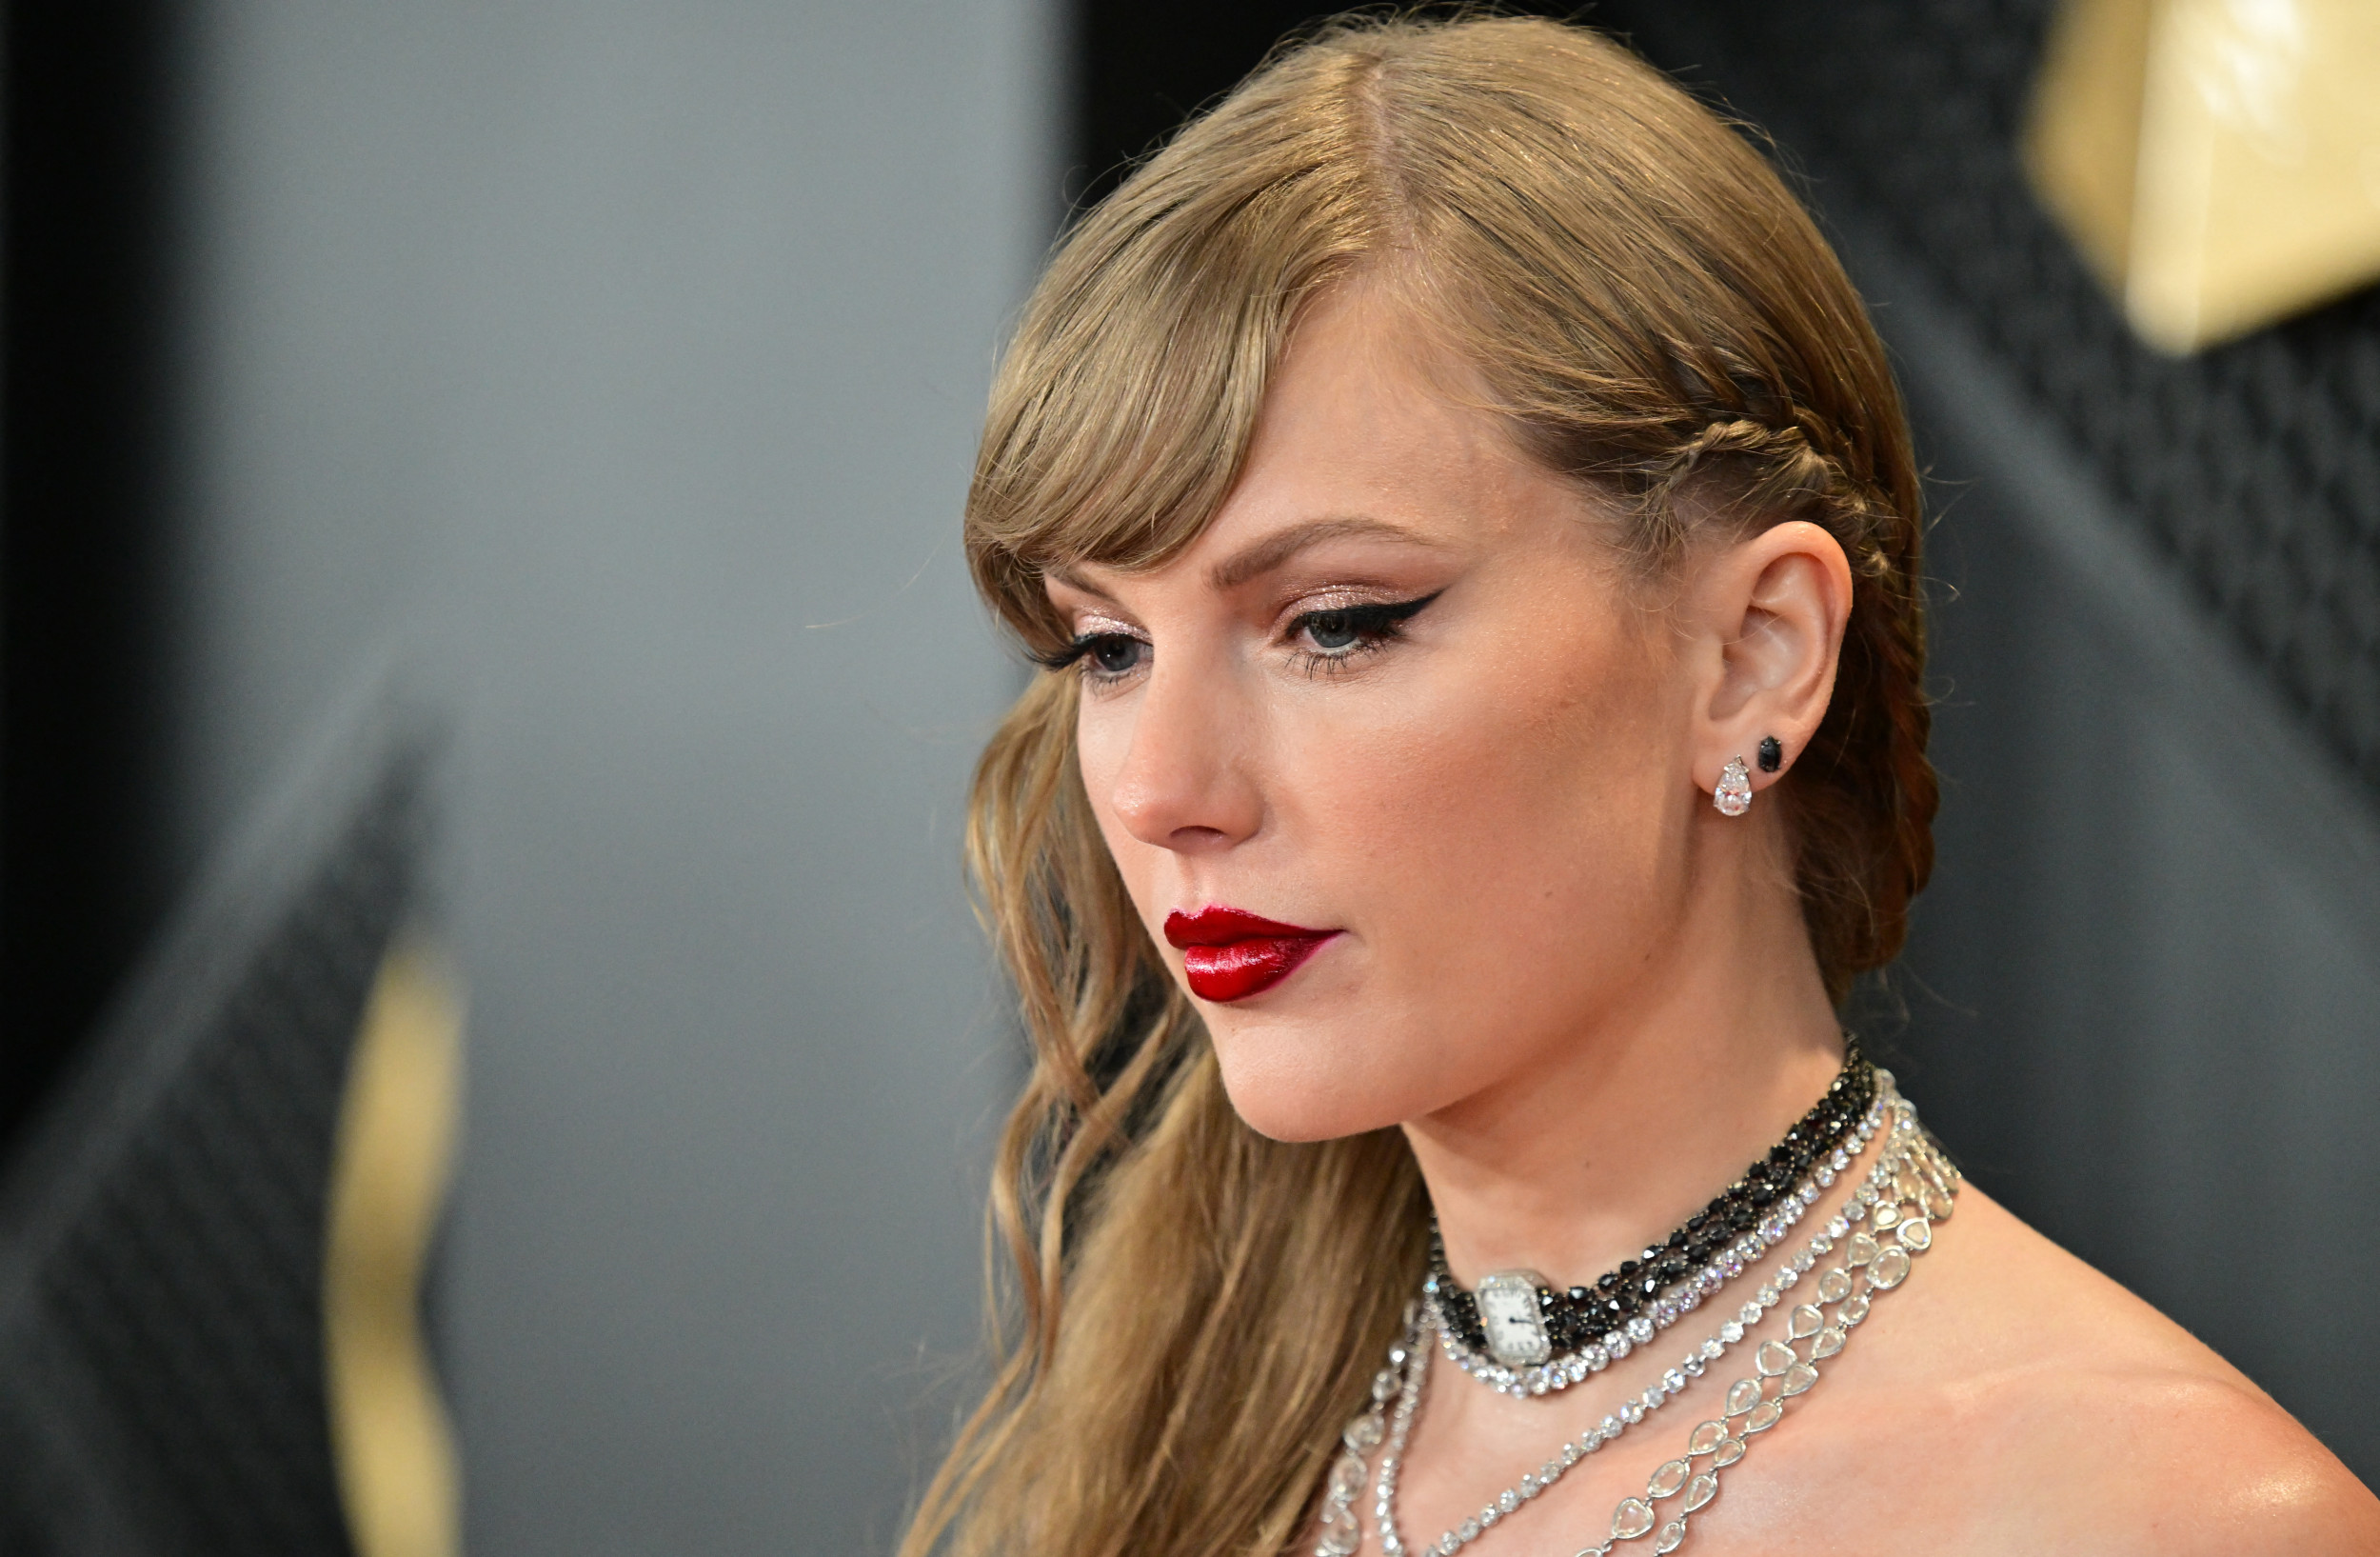 Taylor Swifts Necklace Detail At Grammys Raises Eyebrows Newsweek 7565